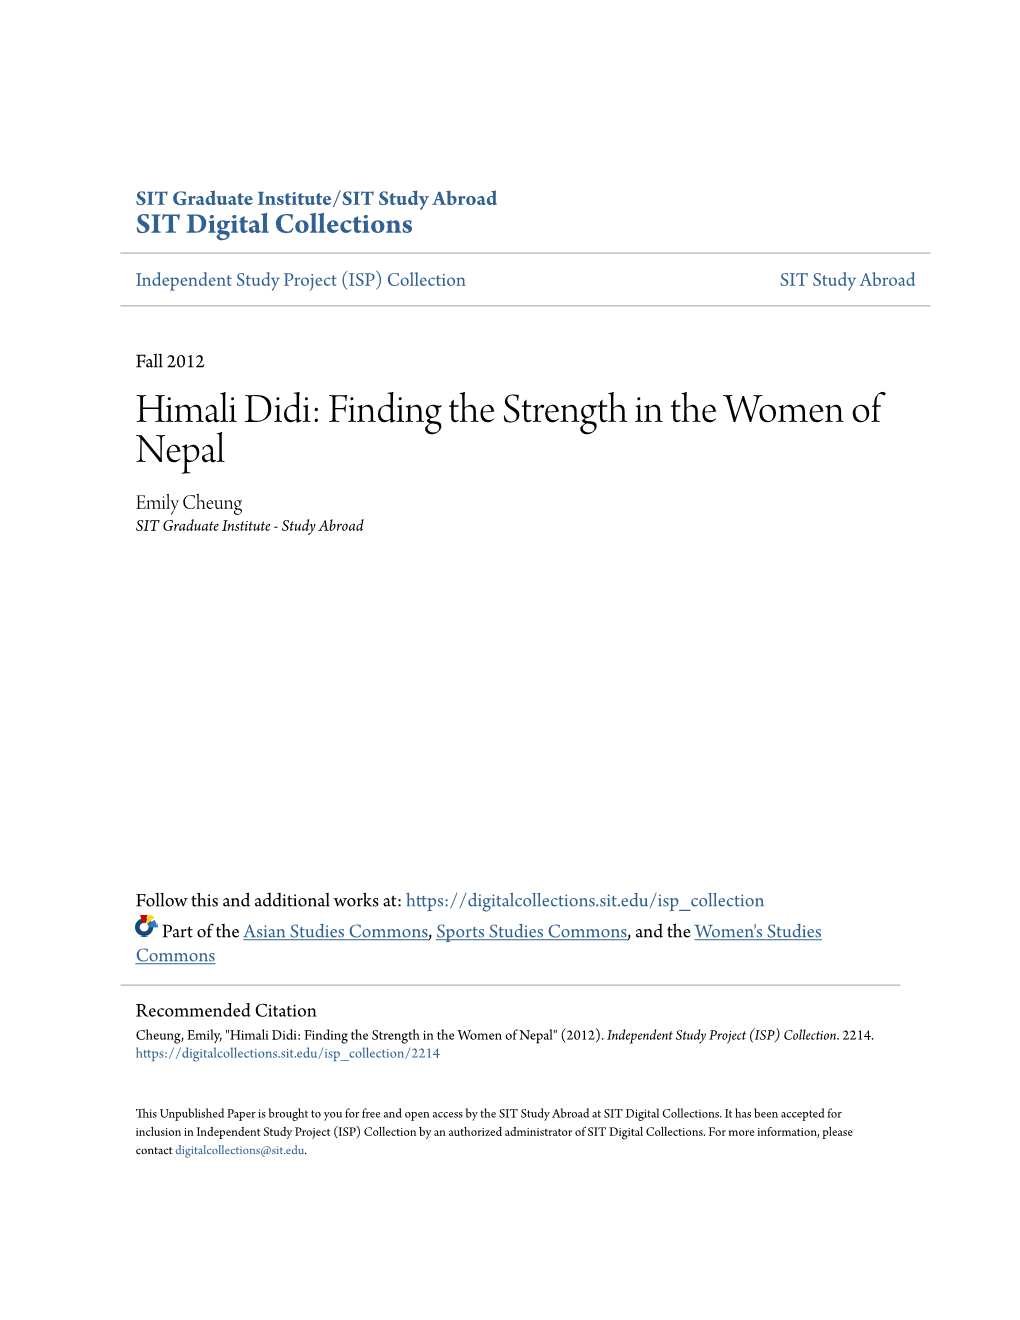 Himali Didi: Finding the Strength in the Women of Nepal Emily Cheung SIT Graduate Institute - Study Abroad